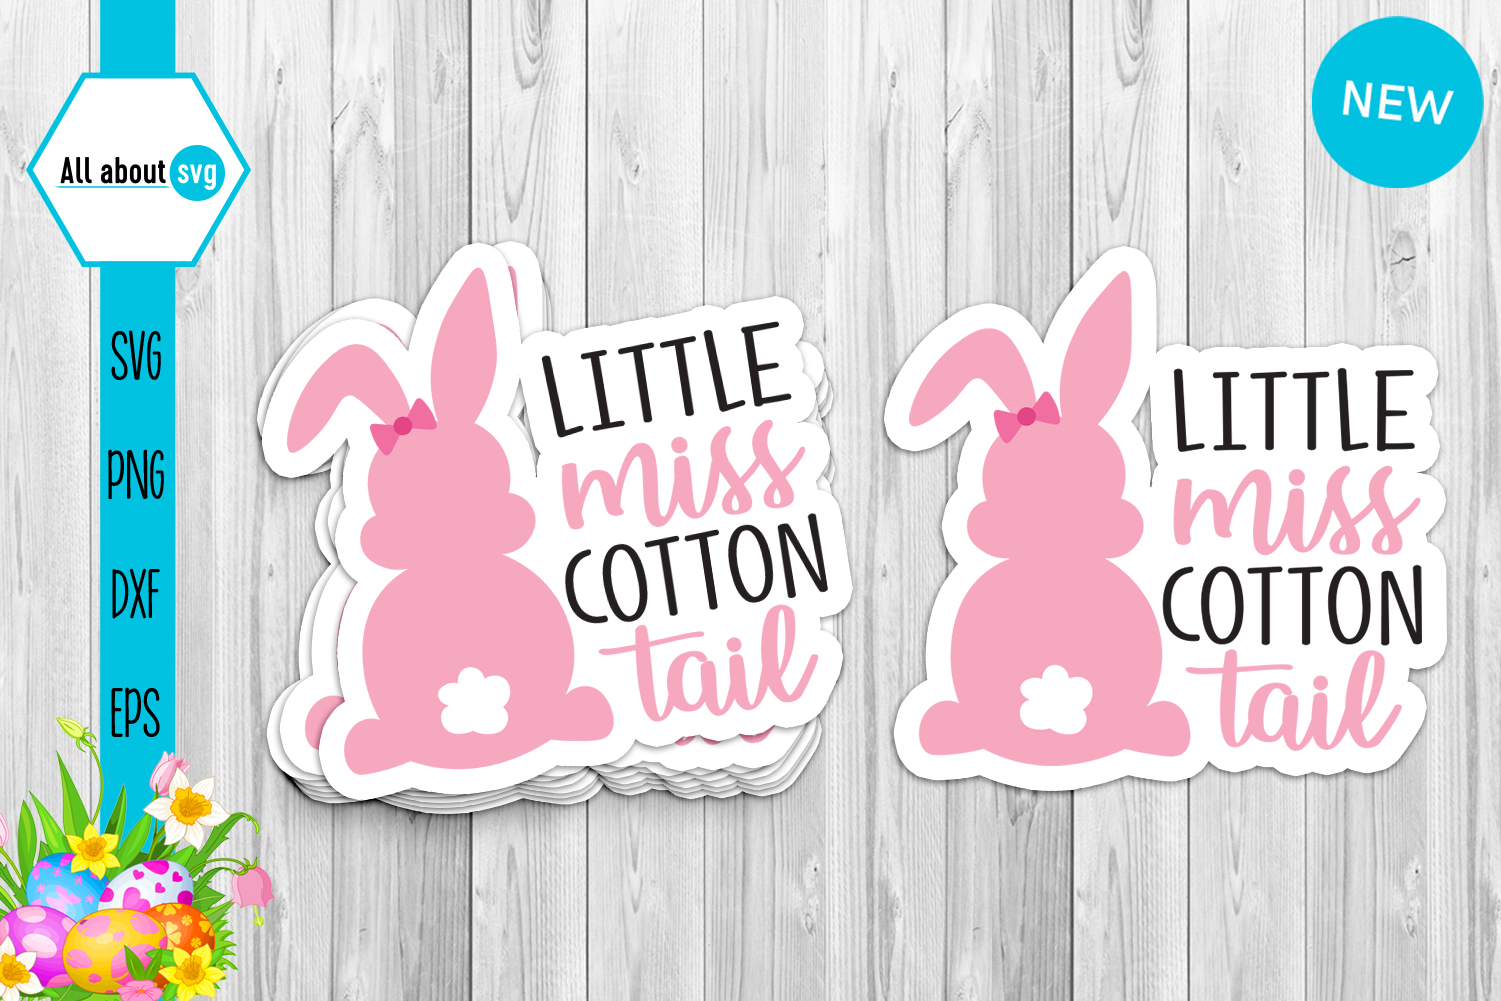 Download Free 8121+ SVG Cotton Tail Bunny Tail Svg File for Cricut